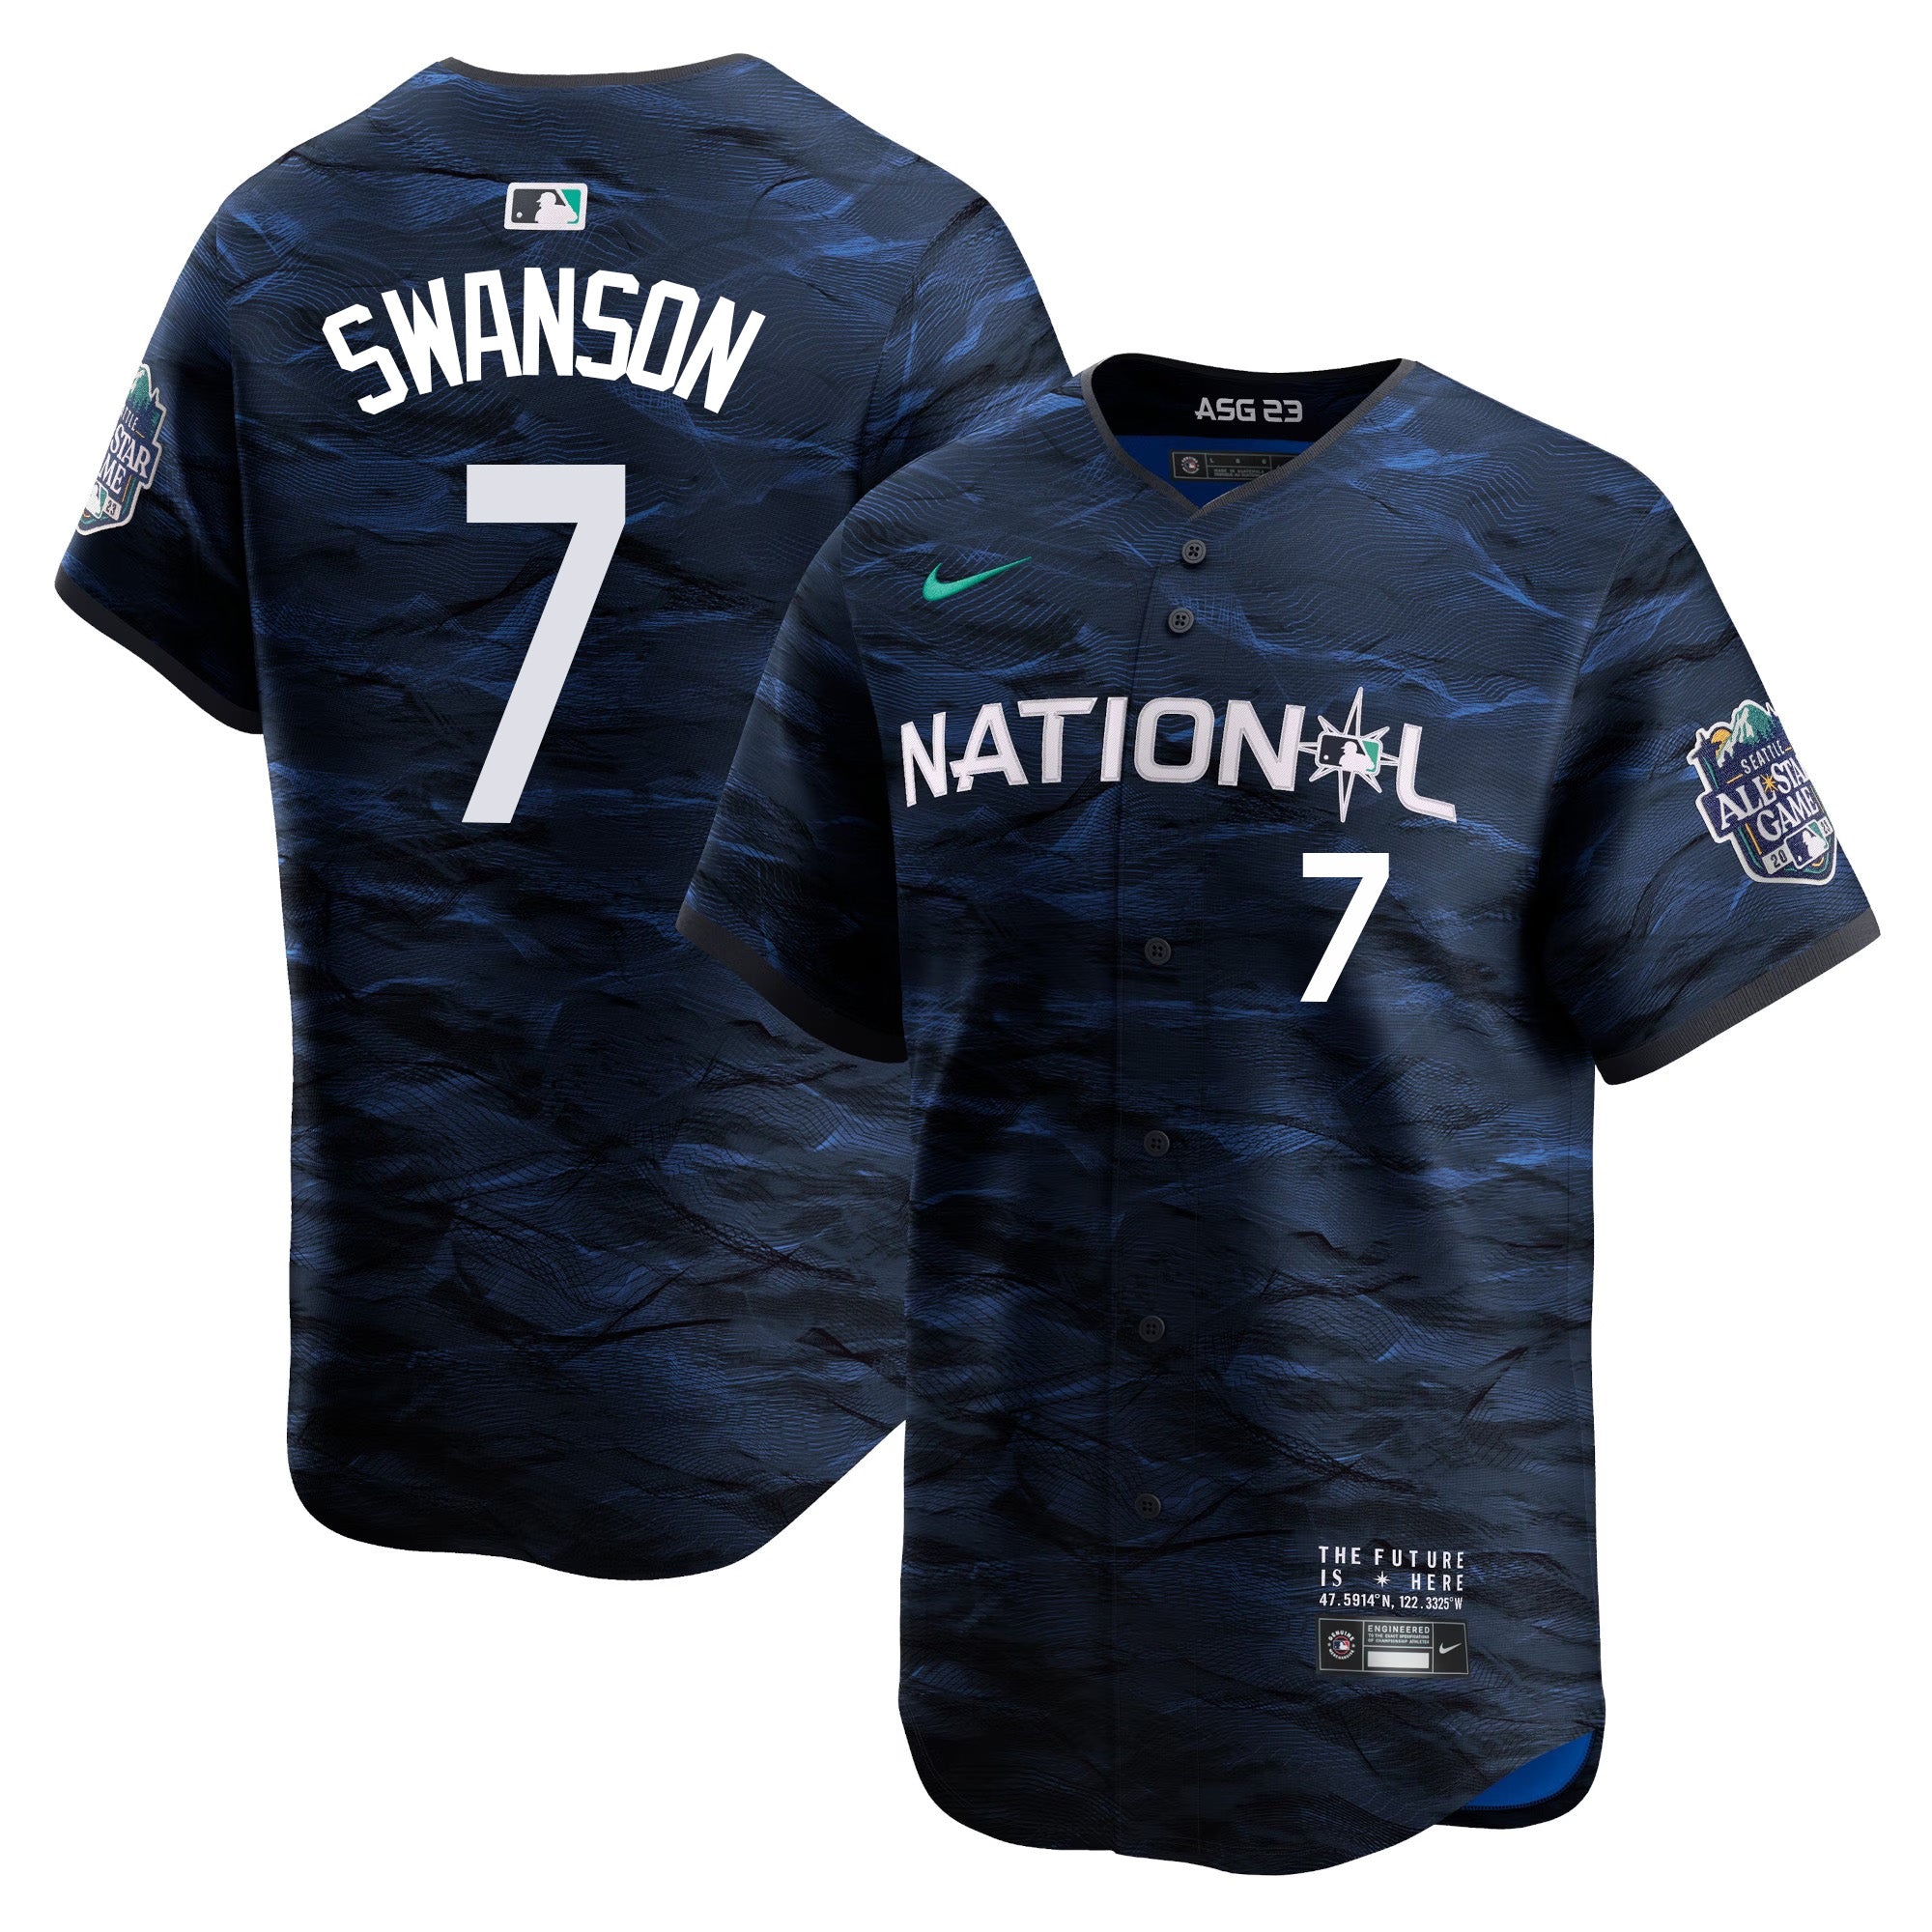 Dansby Swanson Chicago Cubs 1968 Cooperstown Jersey by NIKE